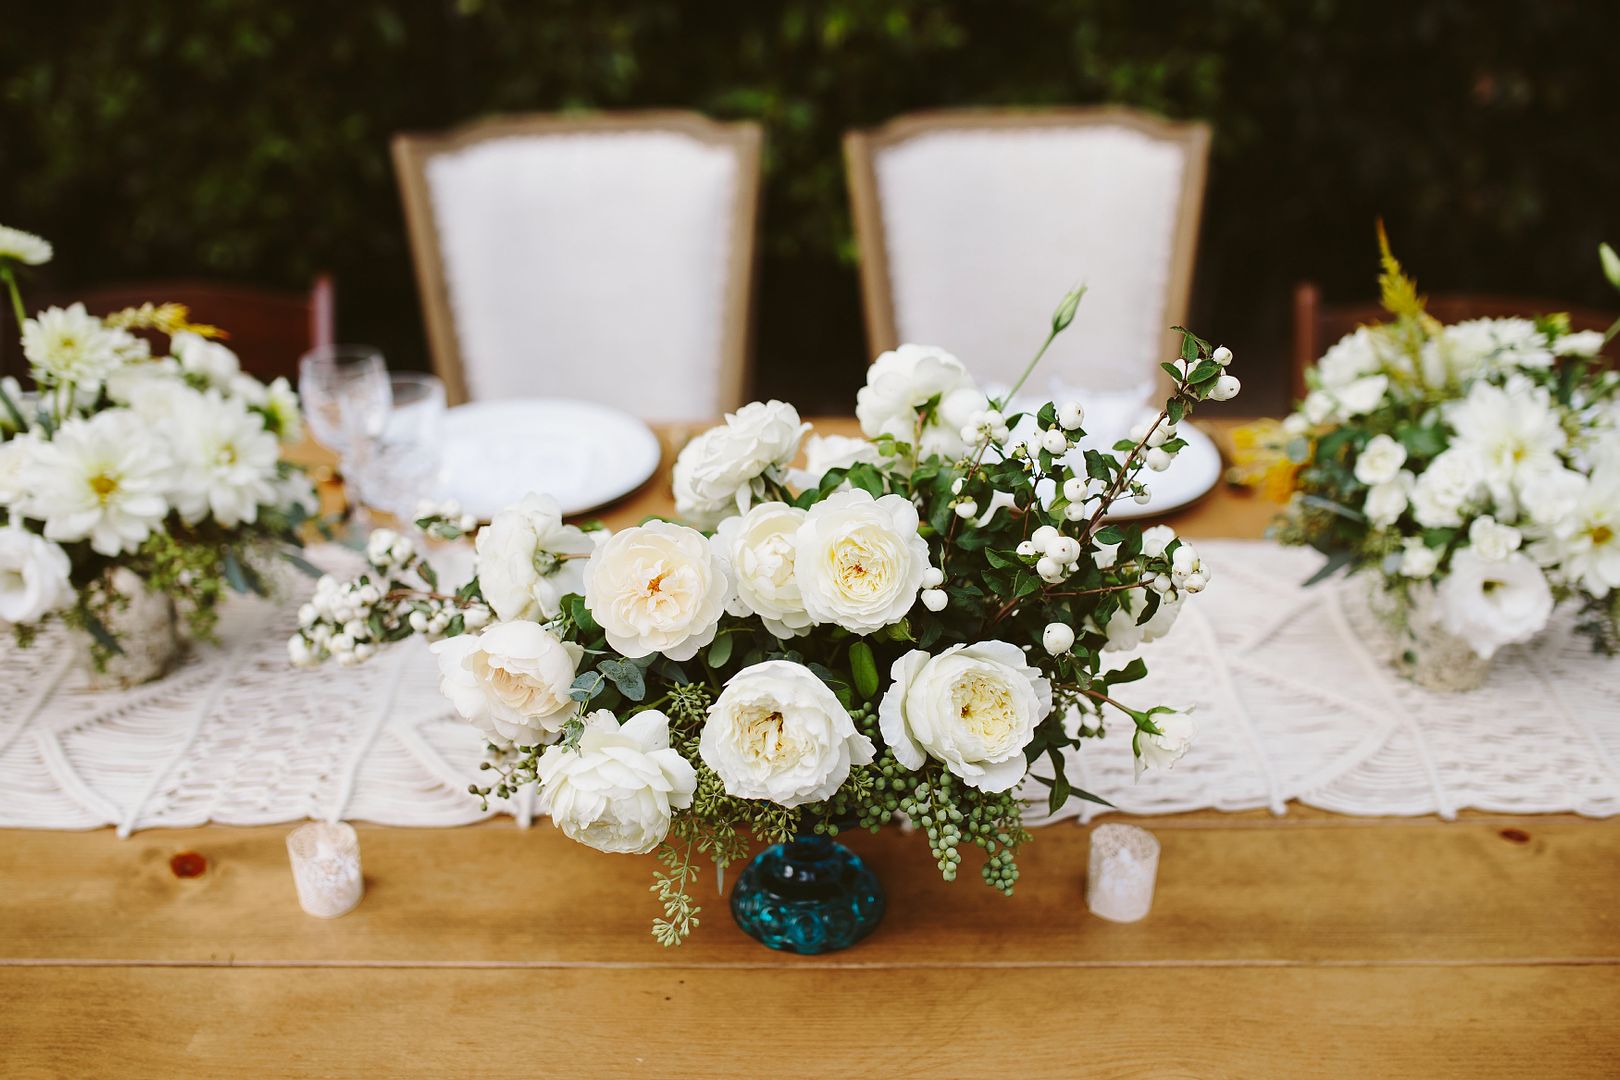  A Charming Wedding at the Lombardi House in LA